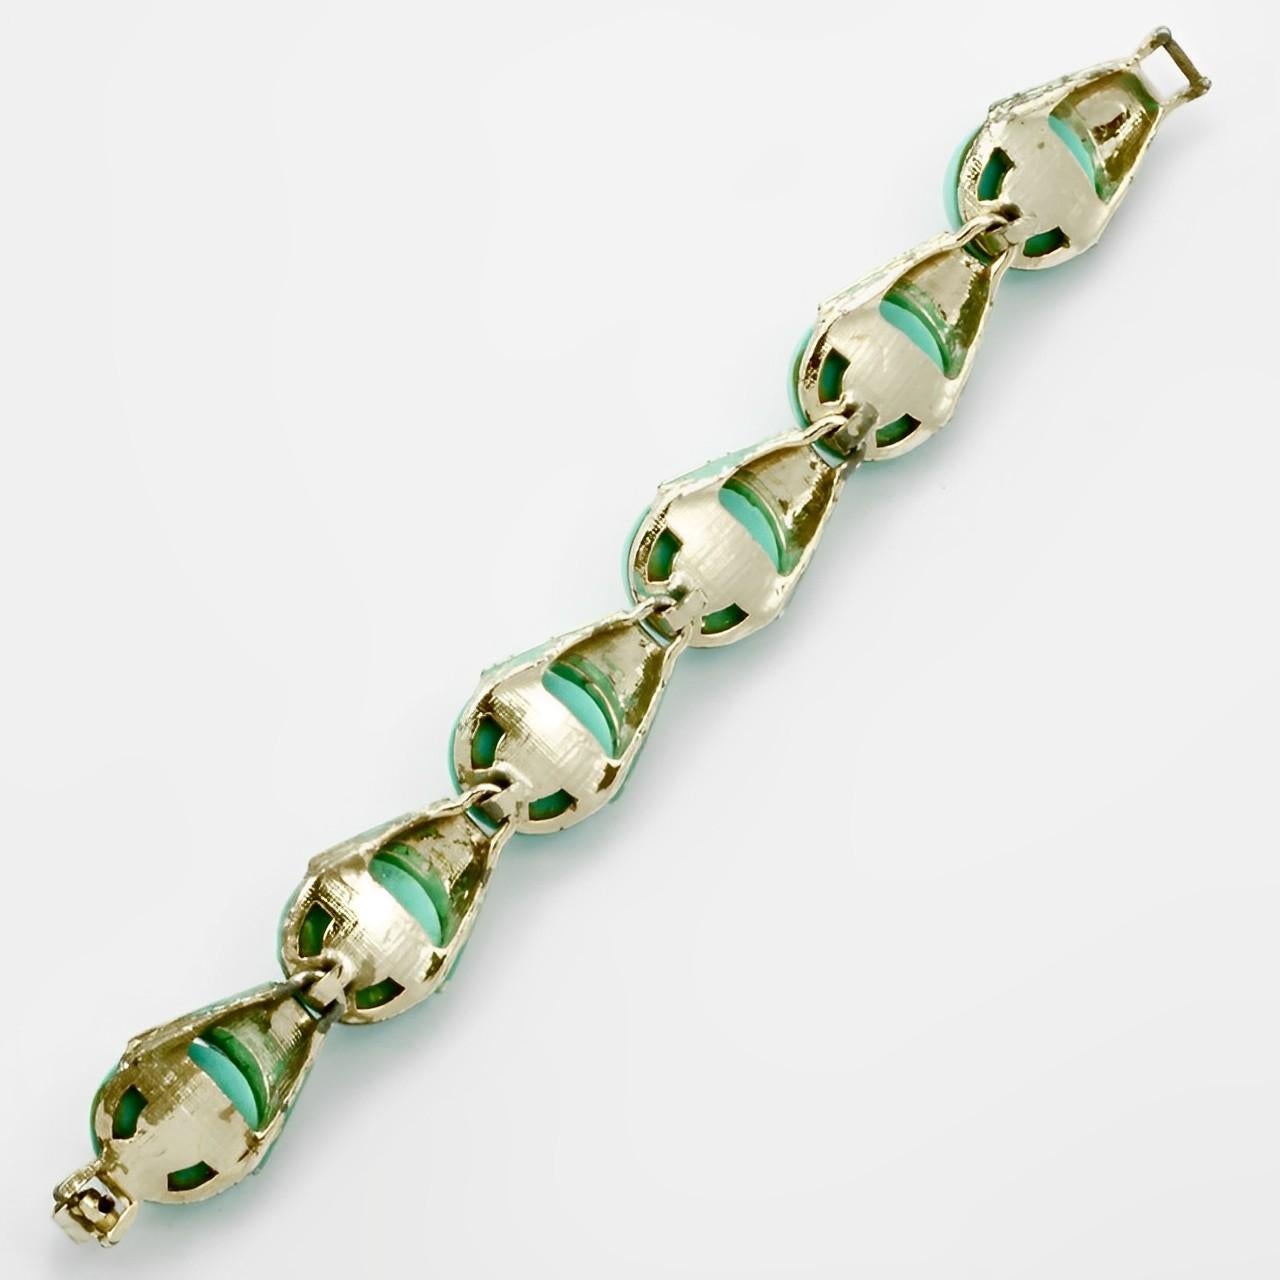 Women's or Men's Pale Gold Tone Bracelet with Turquoise Enamel and Lucite Links circa 1960s For Sale